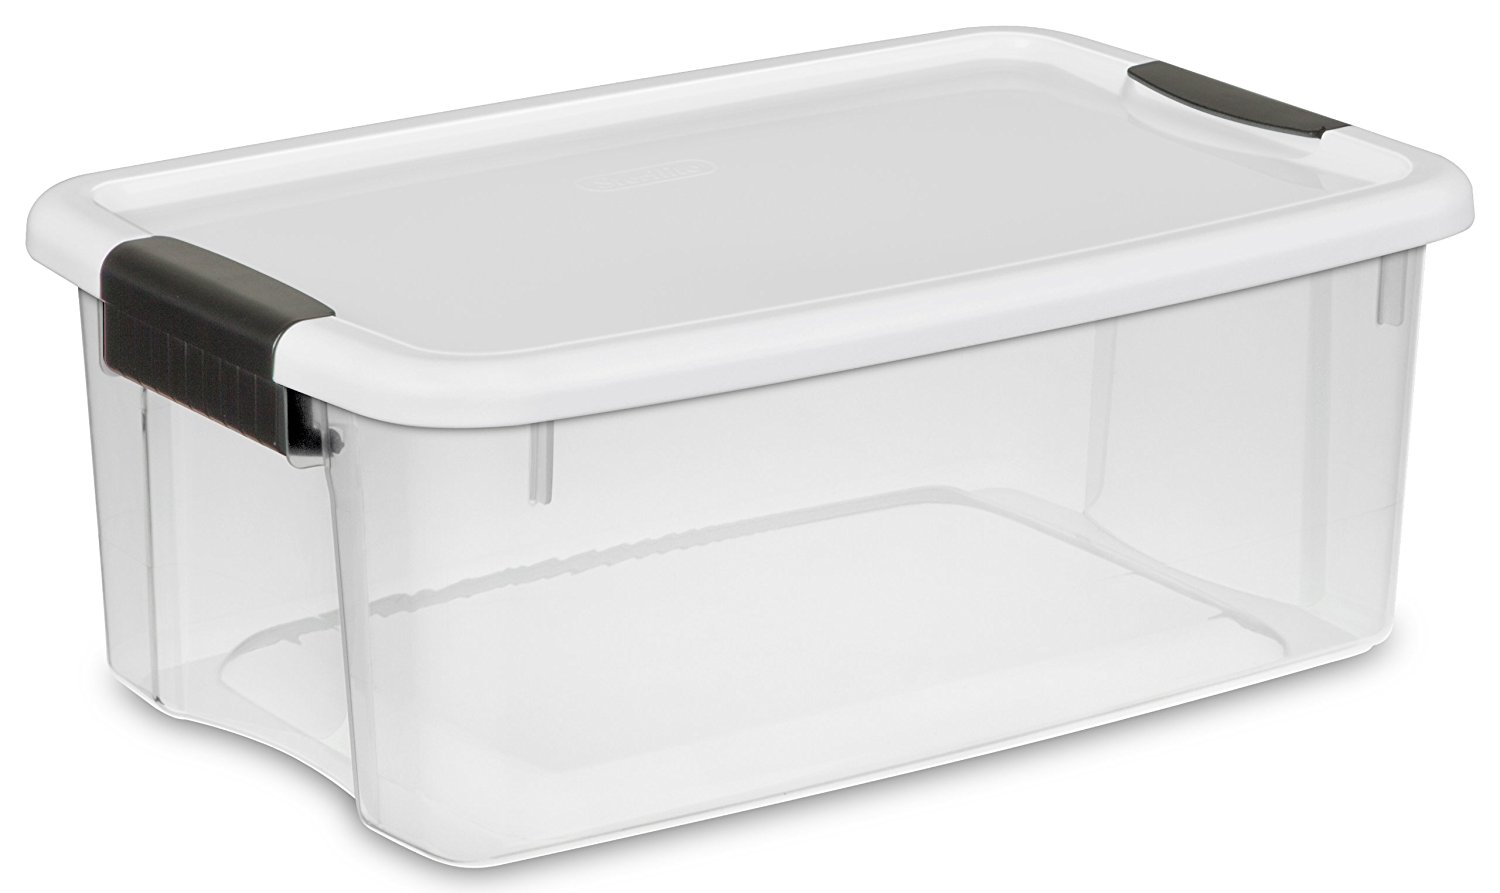 Sterilite 19849806 18 Quart/17 Liter Ultra Latch Box, Clear with a White Lid and Black Latches, 6-Pack